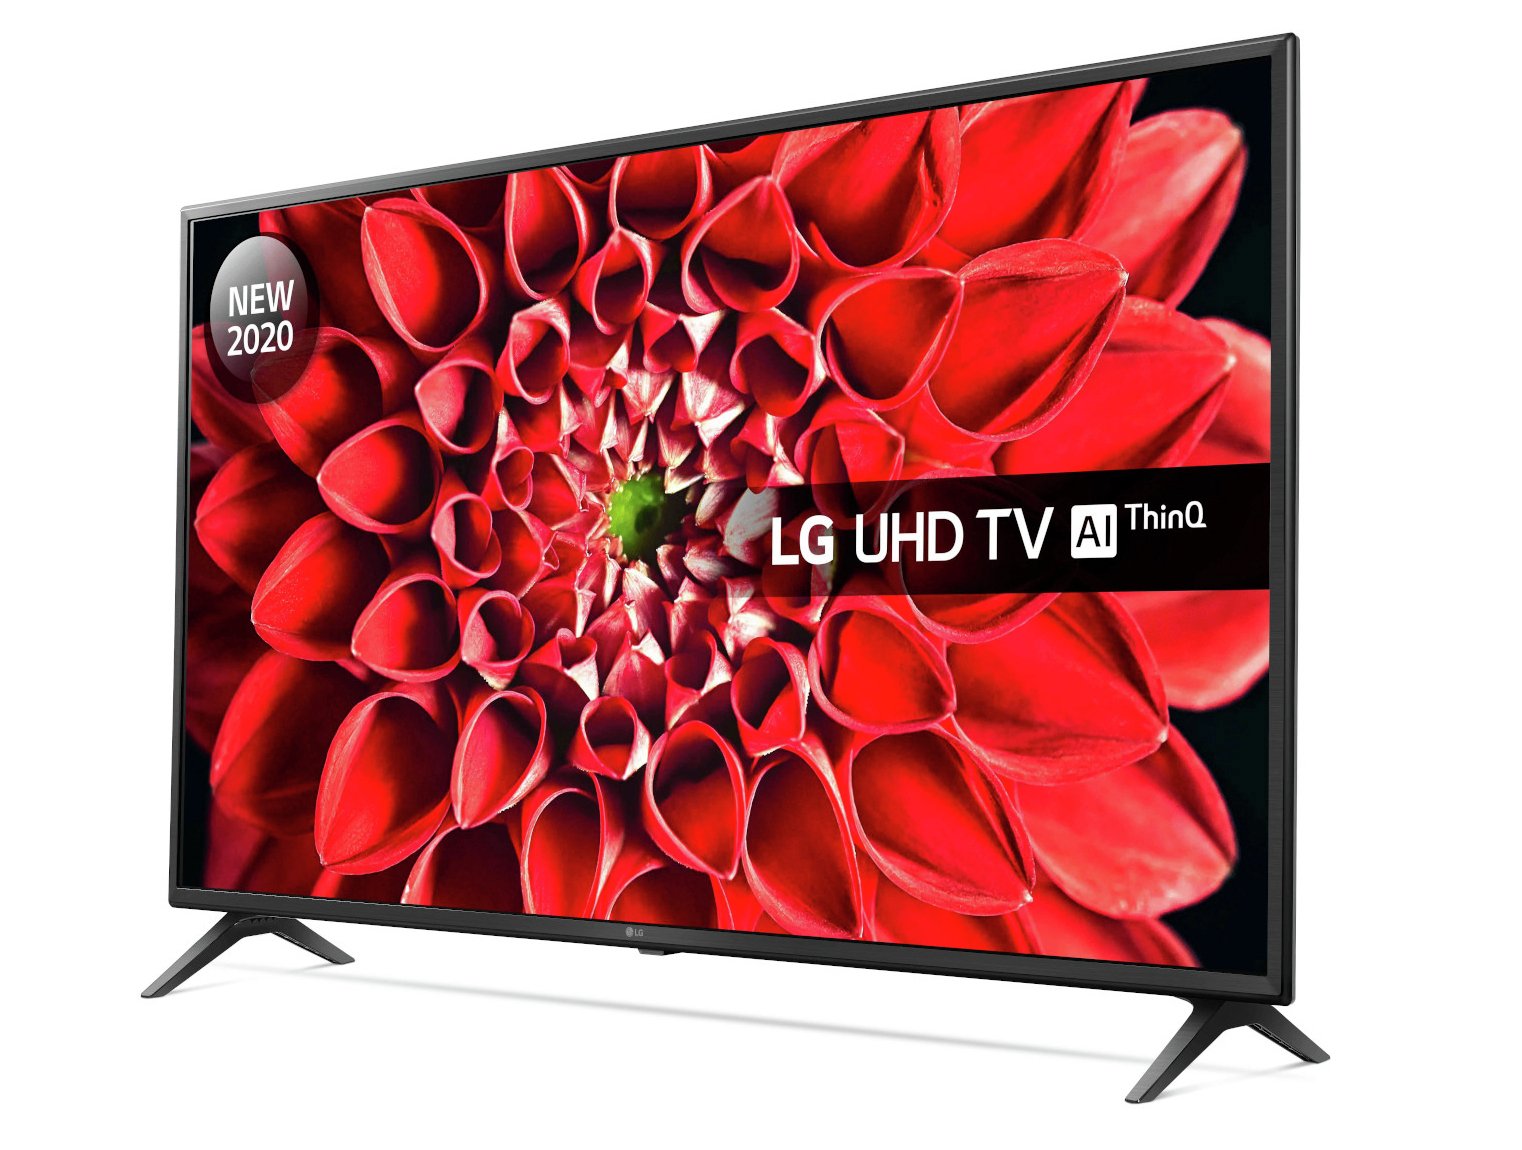 LG 60 Inch 60UN7100 Smart 4K Ultra HD LED TV with HDR Review